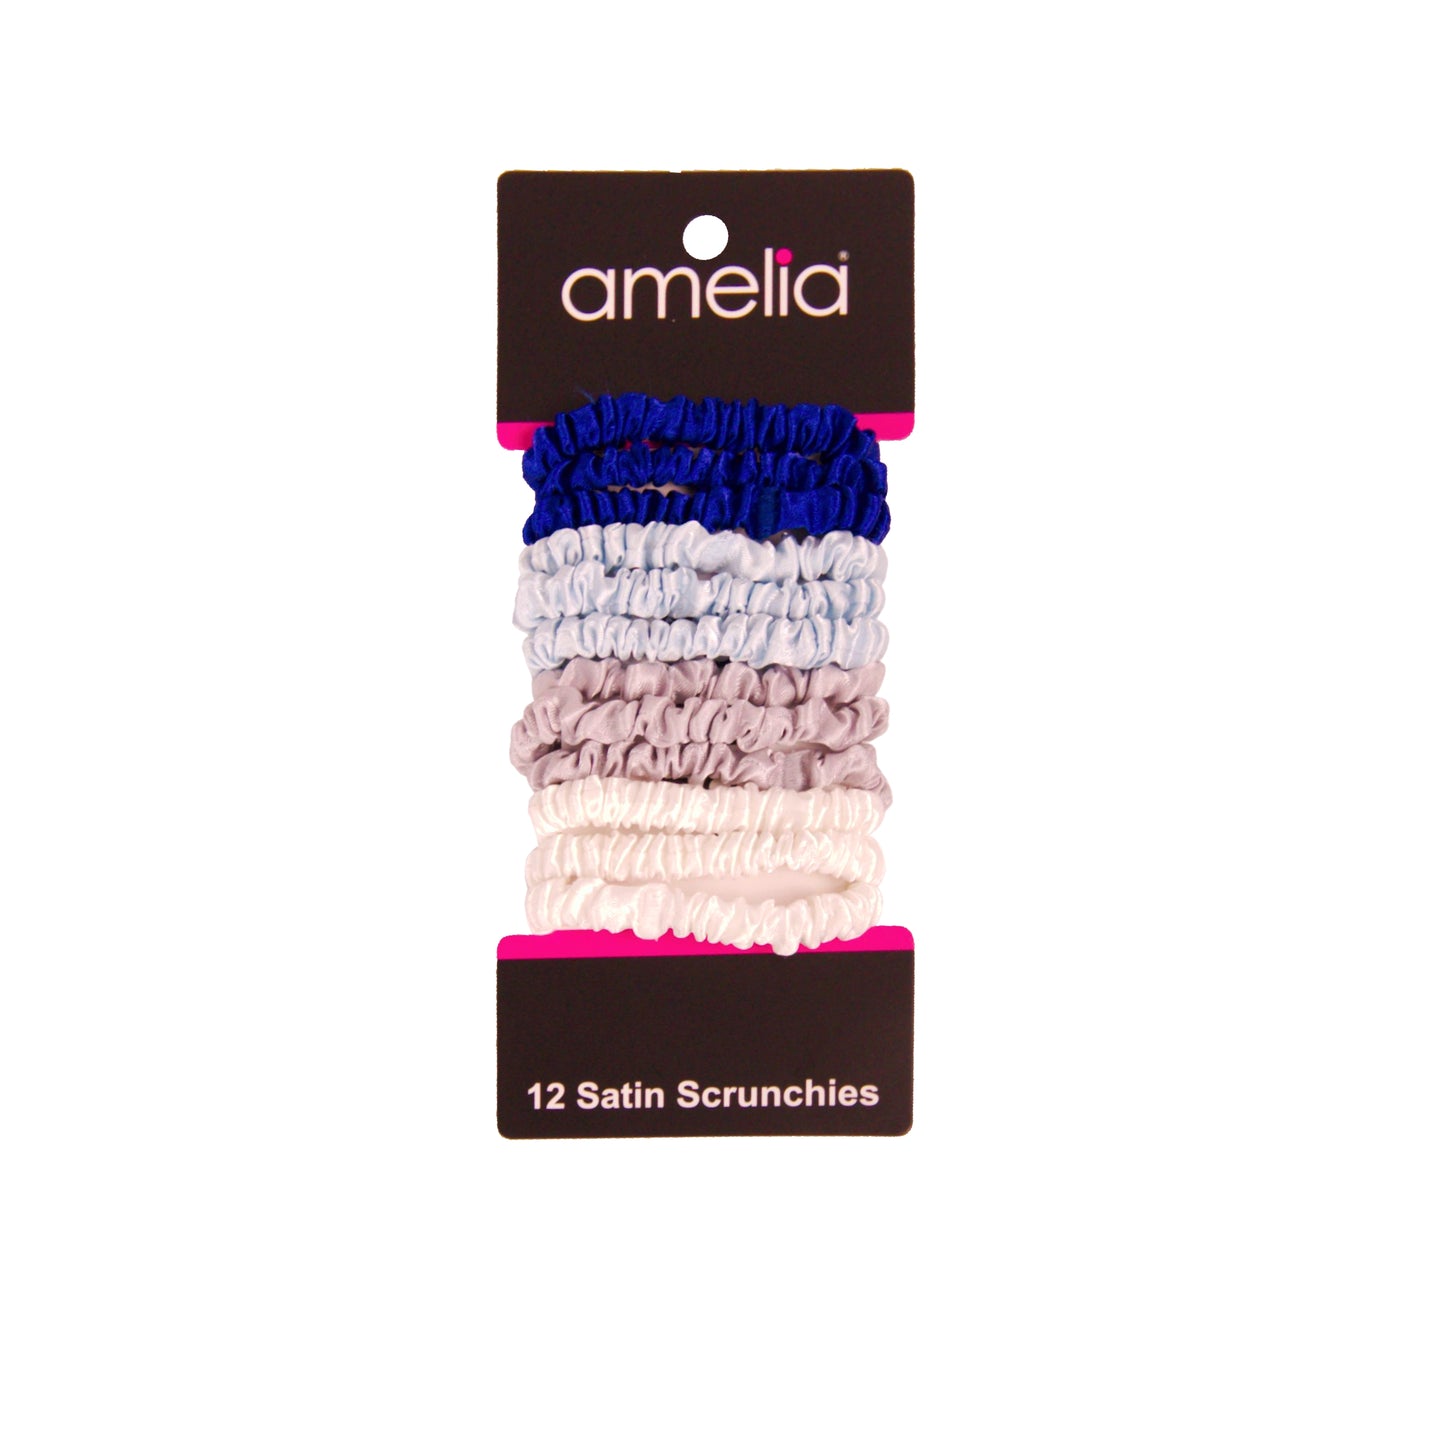 Amelia Beauty, Ocean Mix Skinny Satin Scrunchies, 2in Diameter, Gentle and Strong Hold, No Snag, No Dents or Creases. 12 Pack